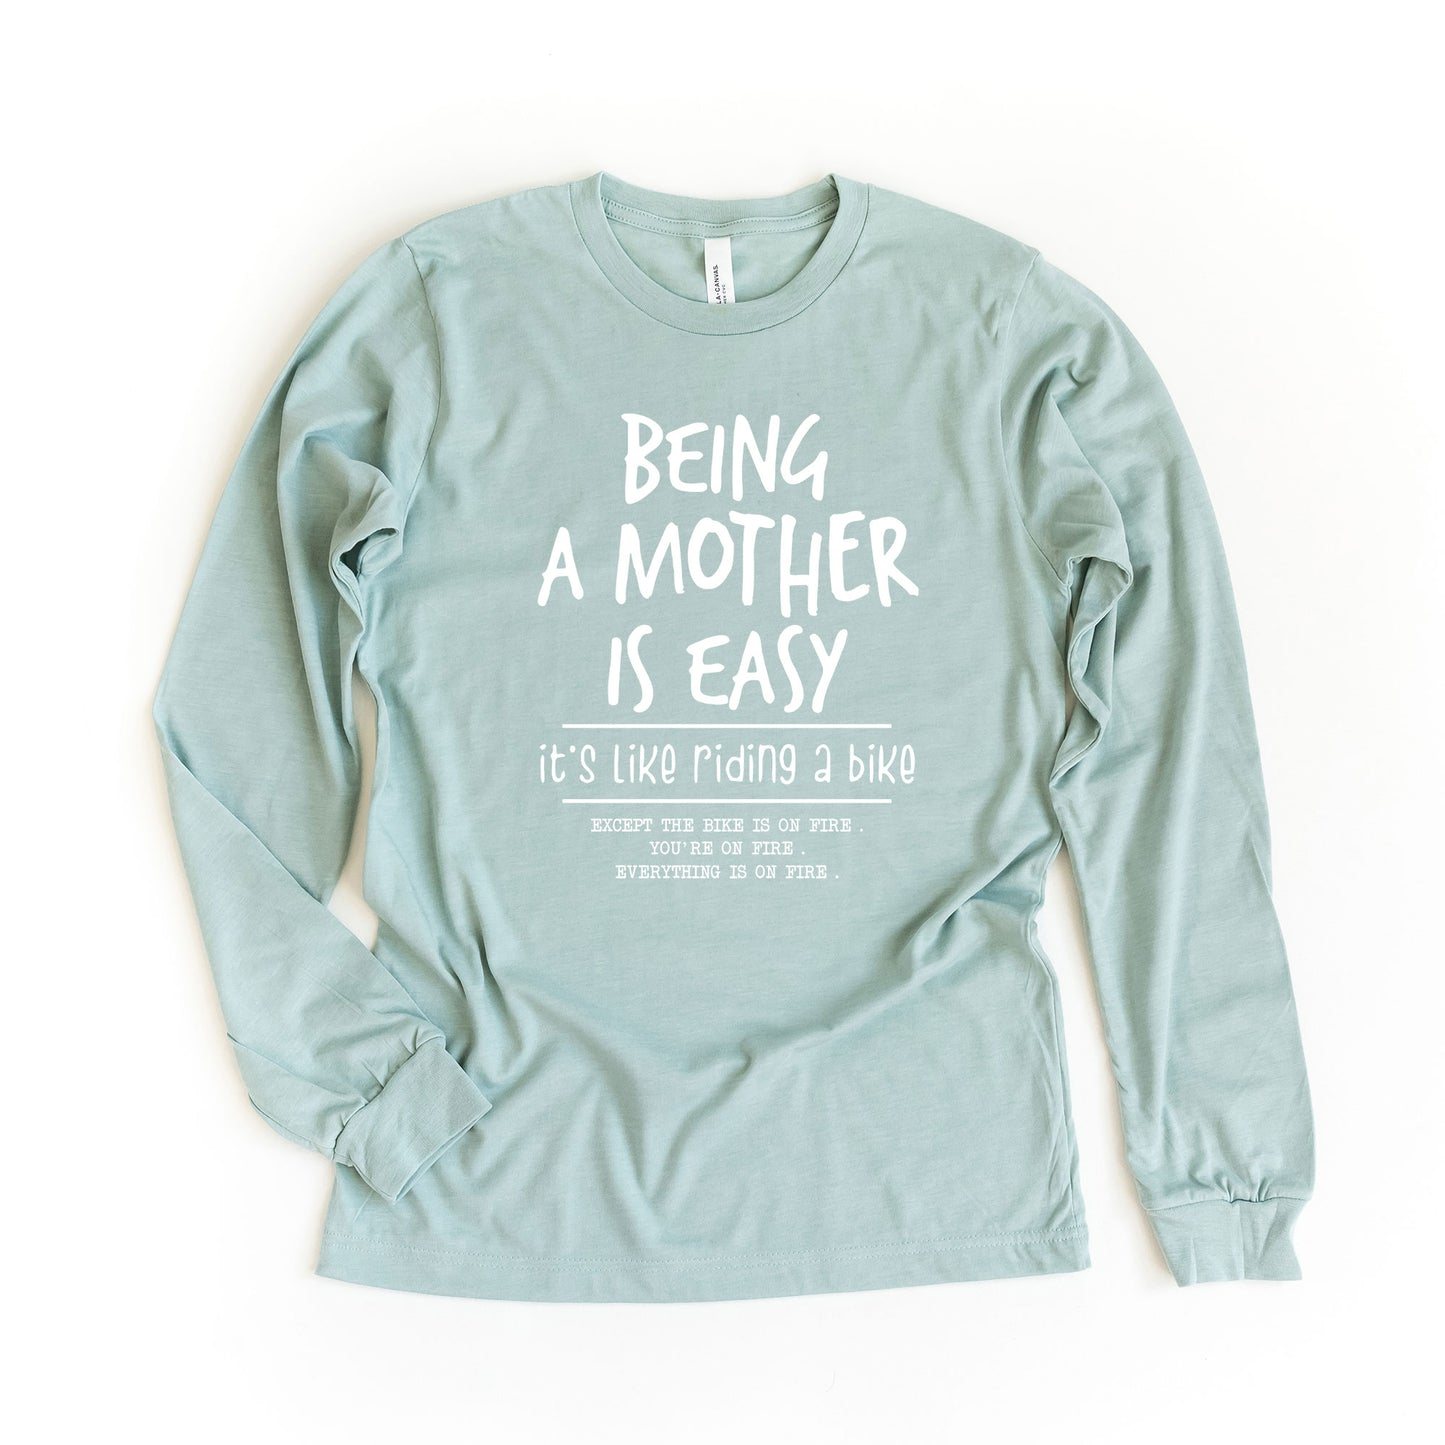 Being A Mother Is Easy | Long Sleeve Crew Neck